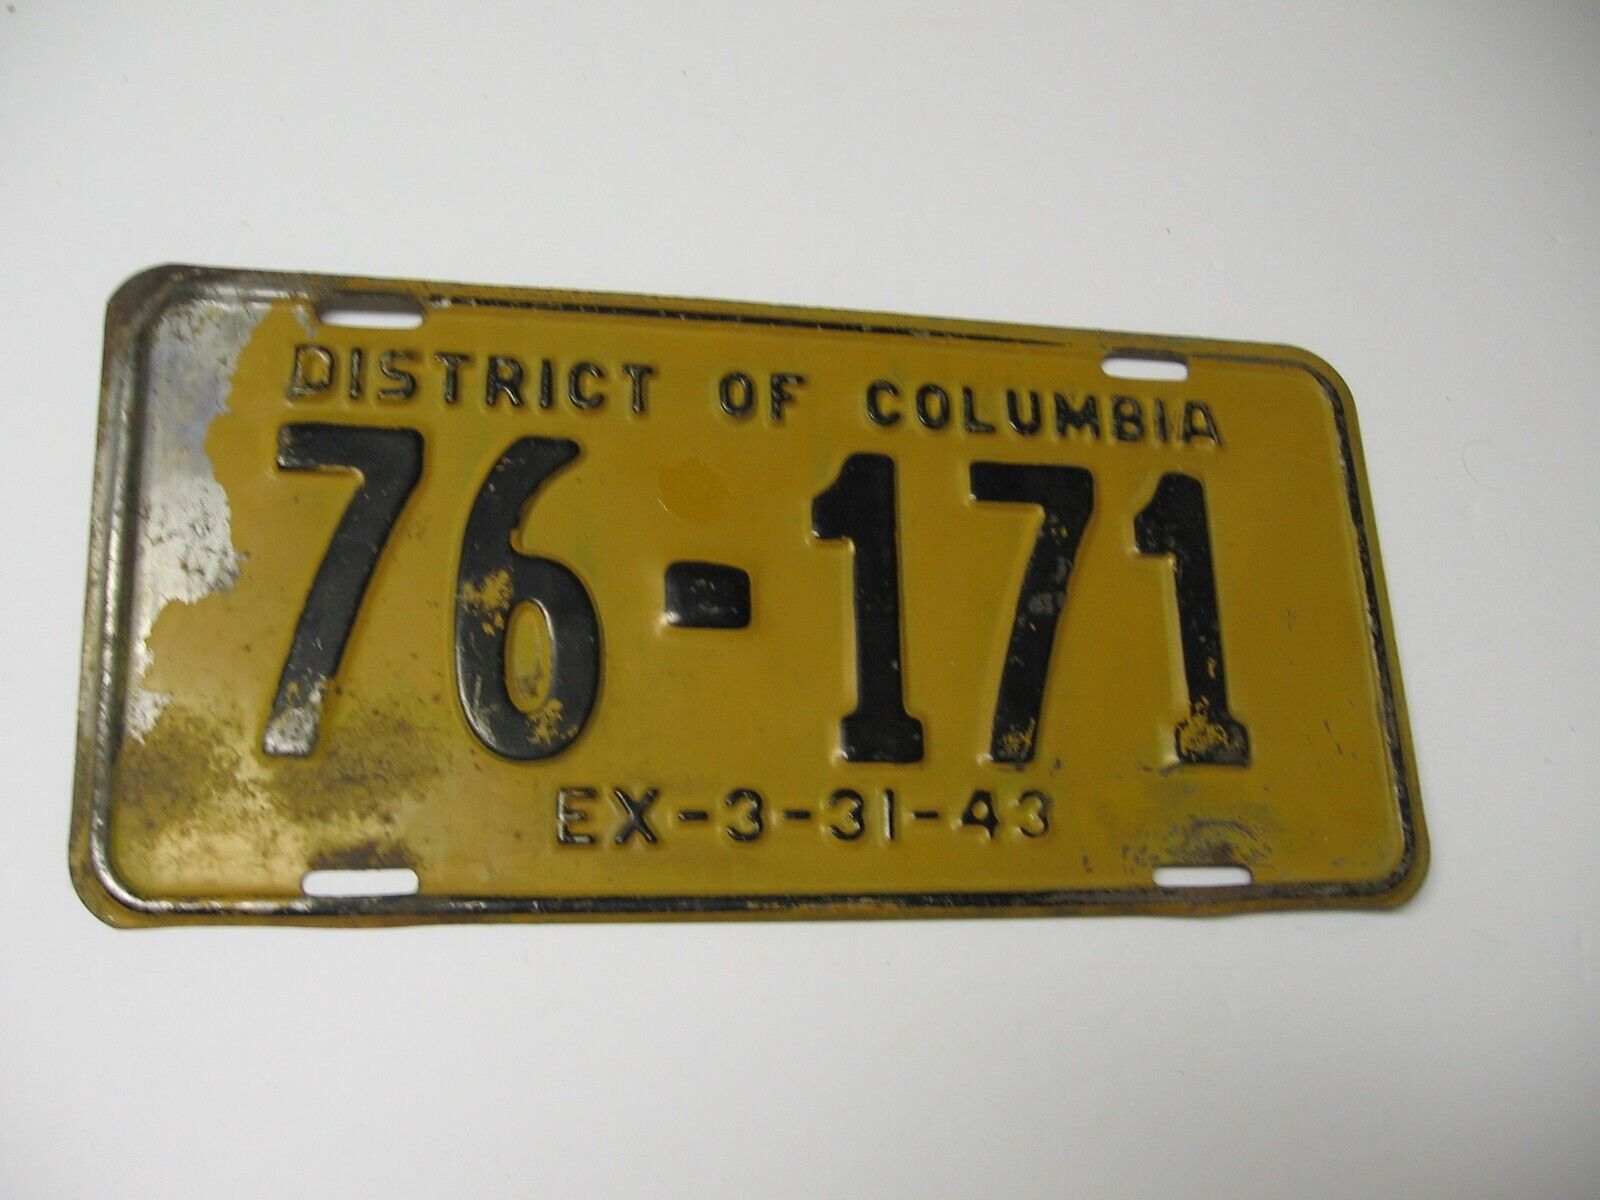 Rare 1943 Washington DC District of Columbia License Plate- 5 digits, EXP. 3-31